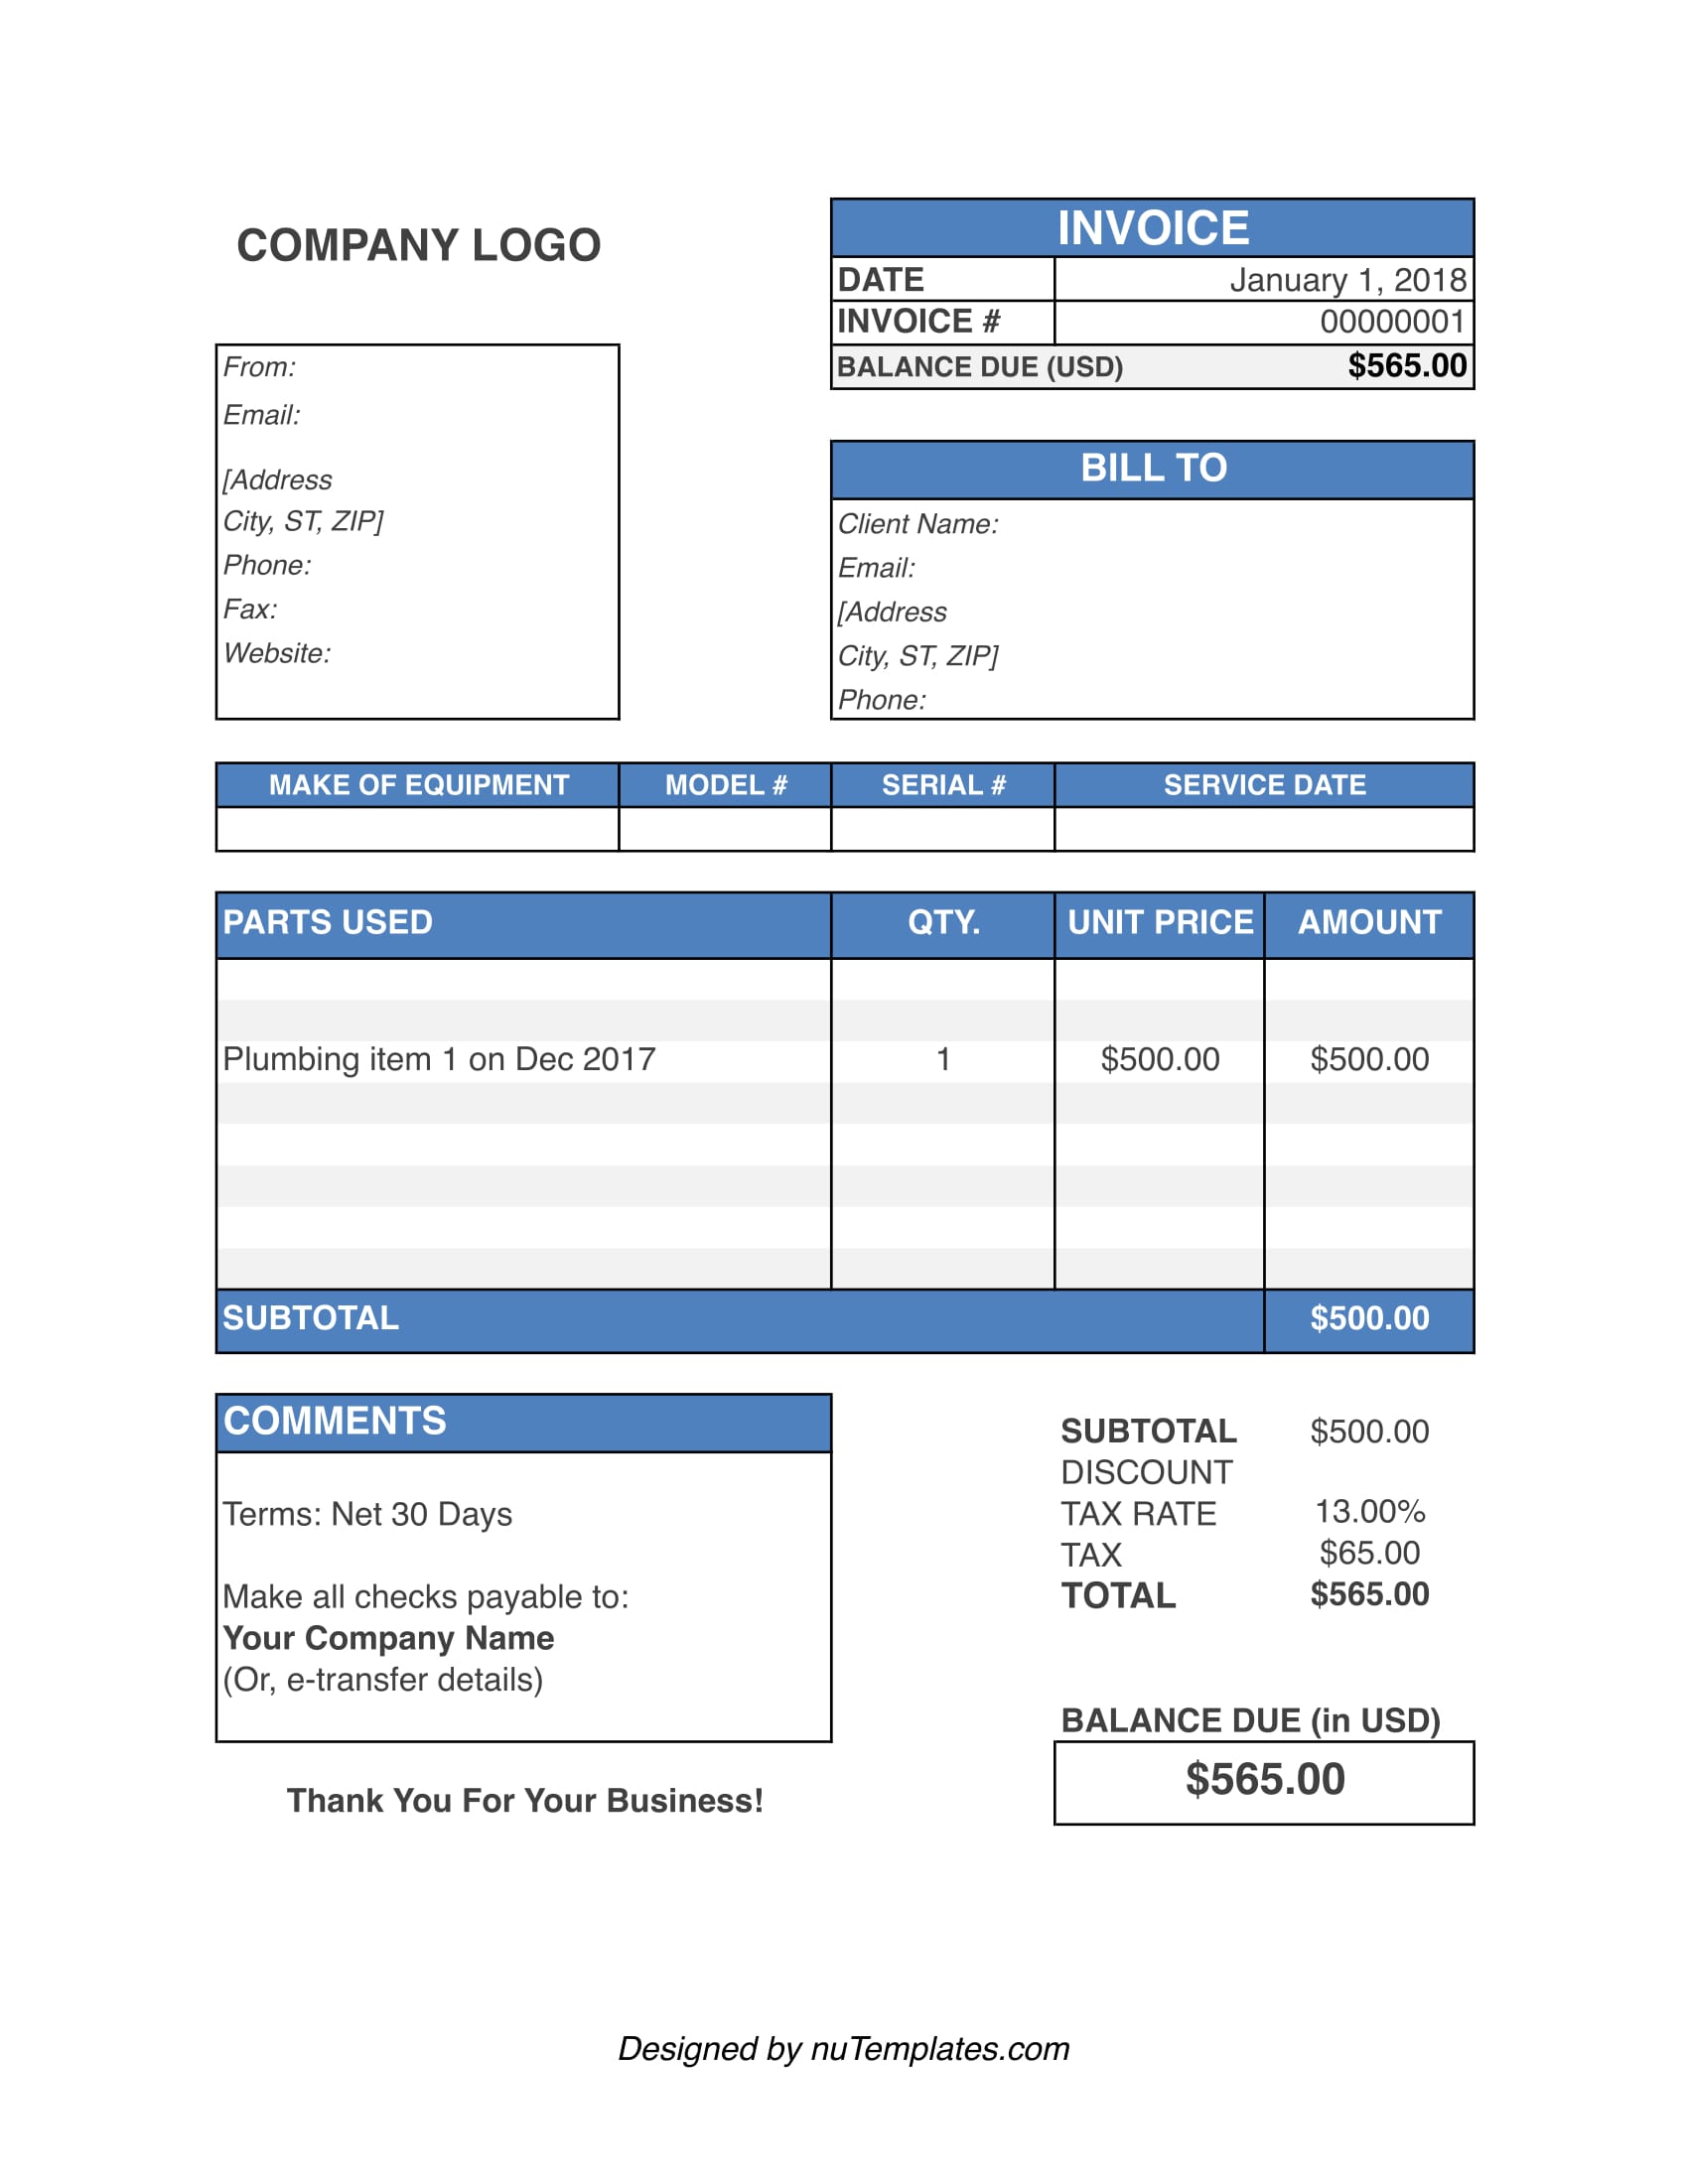 Plumbing Invoice Template Plumbing Invoices nuTemplates